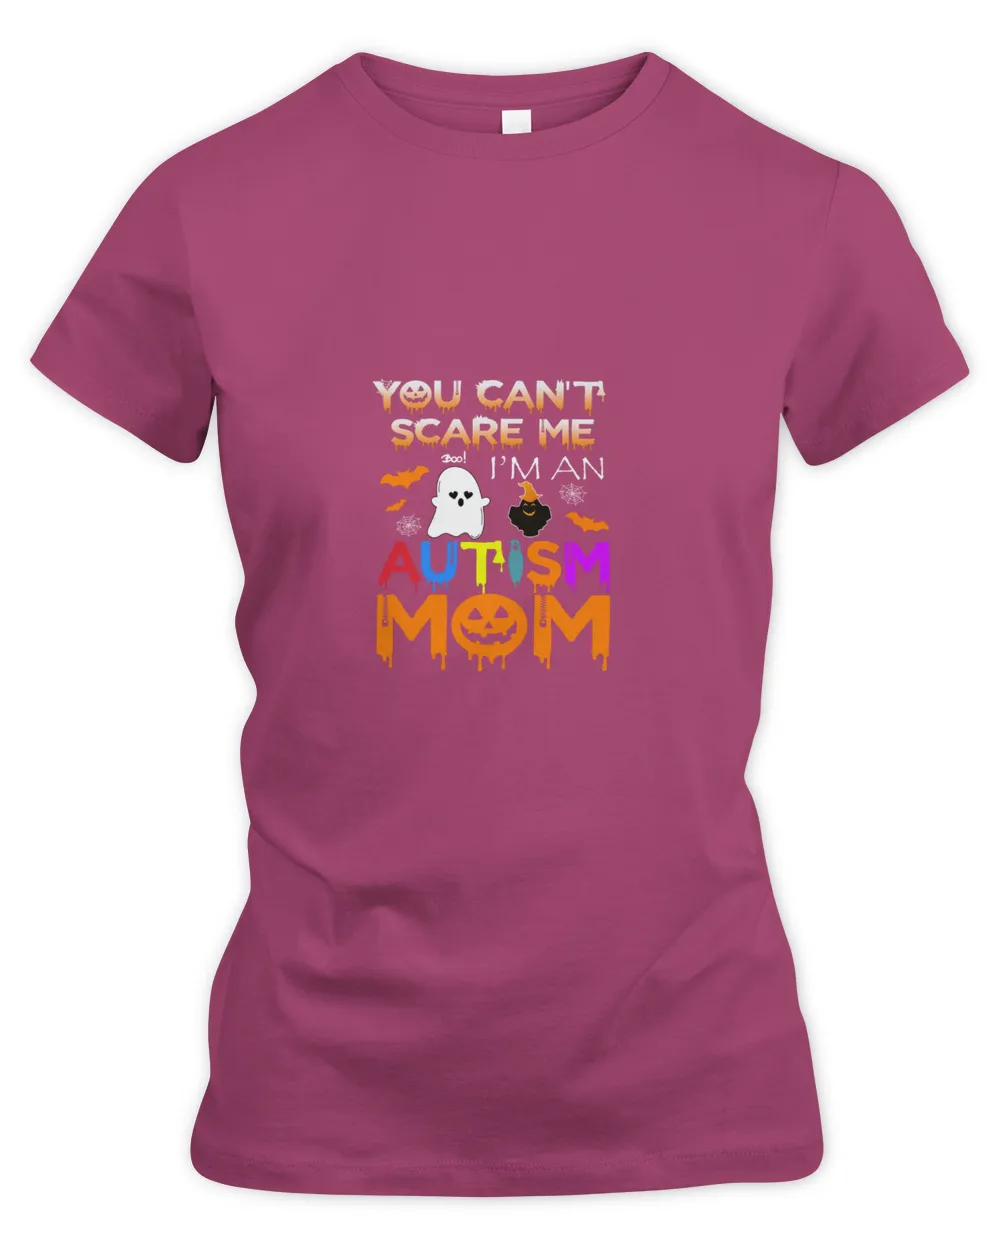 You can't scare me Autism mom Premium Slim Fit Tee